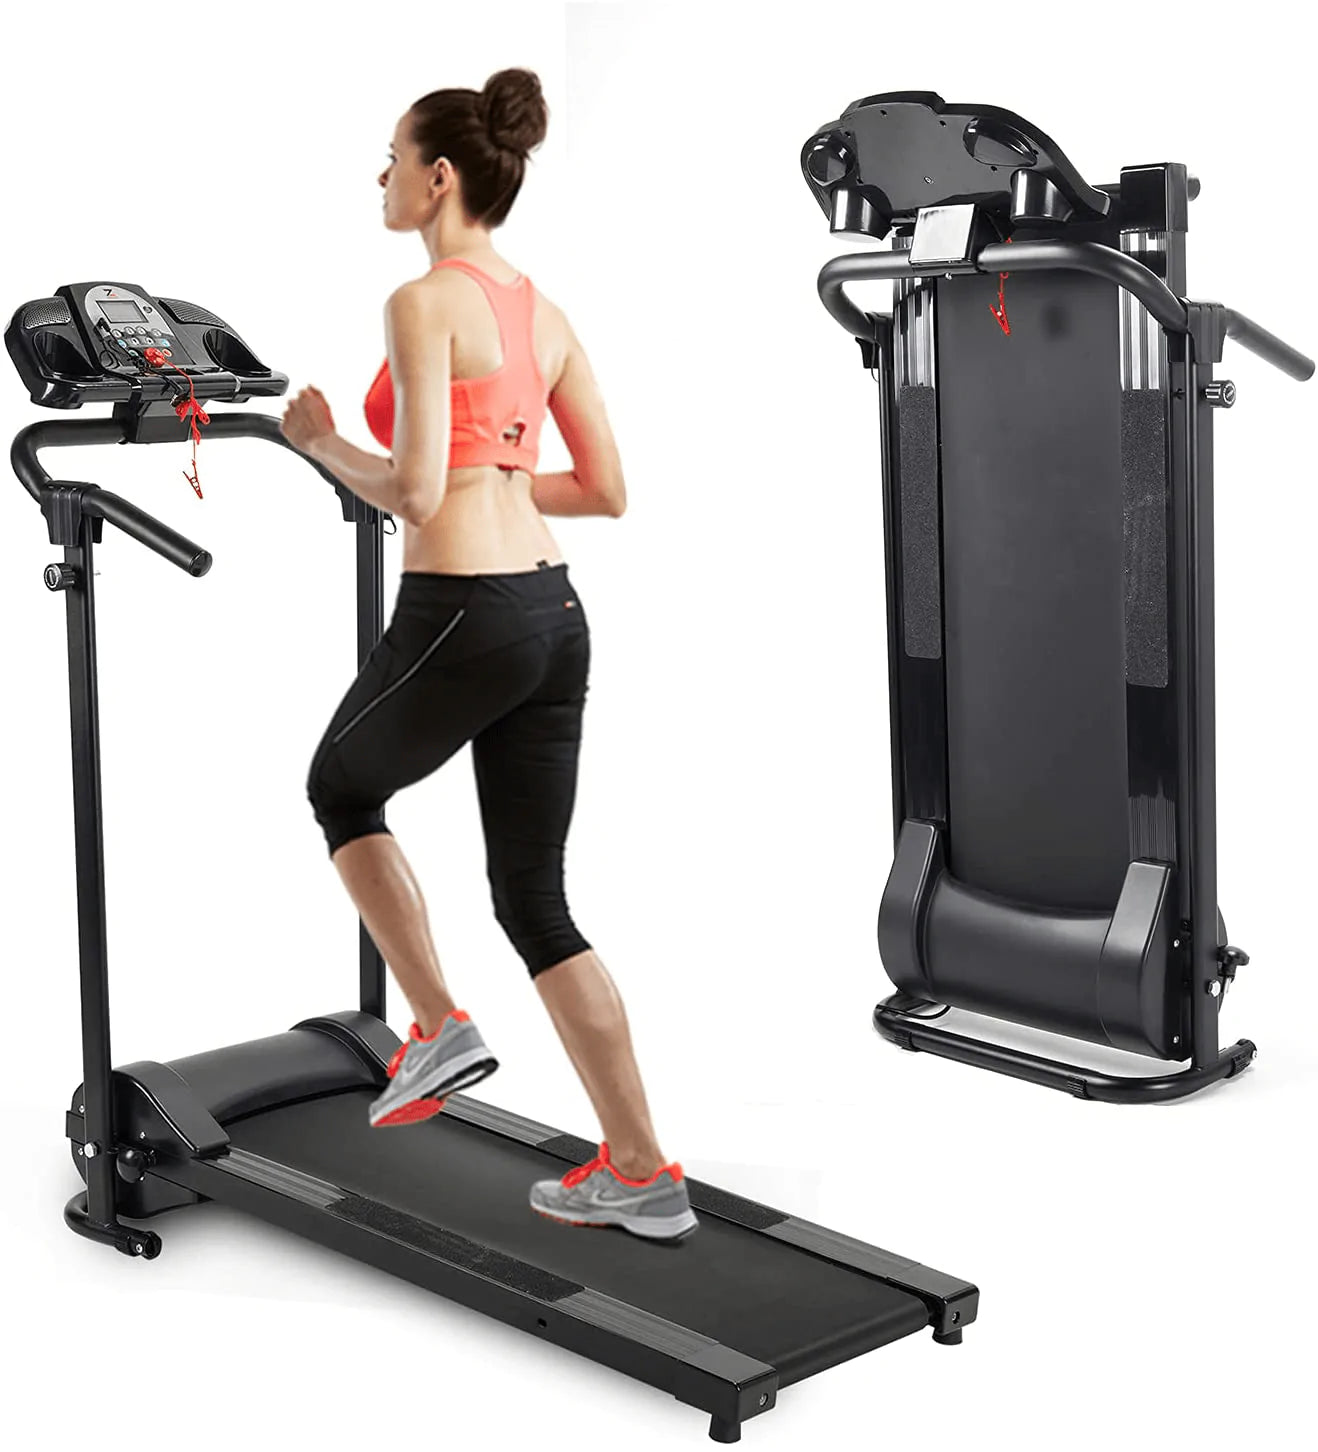 ZELUS Folding Treadmill for Home Gym, Portable Wheels, 750W Electric Foldable Running Cardio Machine with Cup Holder, Sports App Walking/Runners Exercise Equipment Animals & Pet Supplies > Pet Supplies > Dog Supplies > Dog Treadmills Z ZELUS   